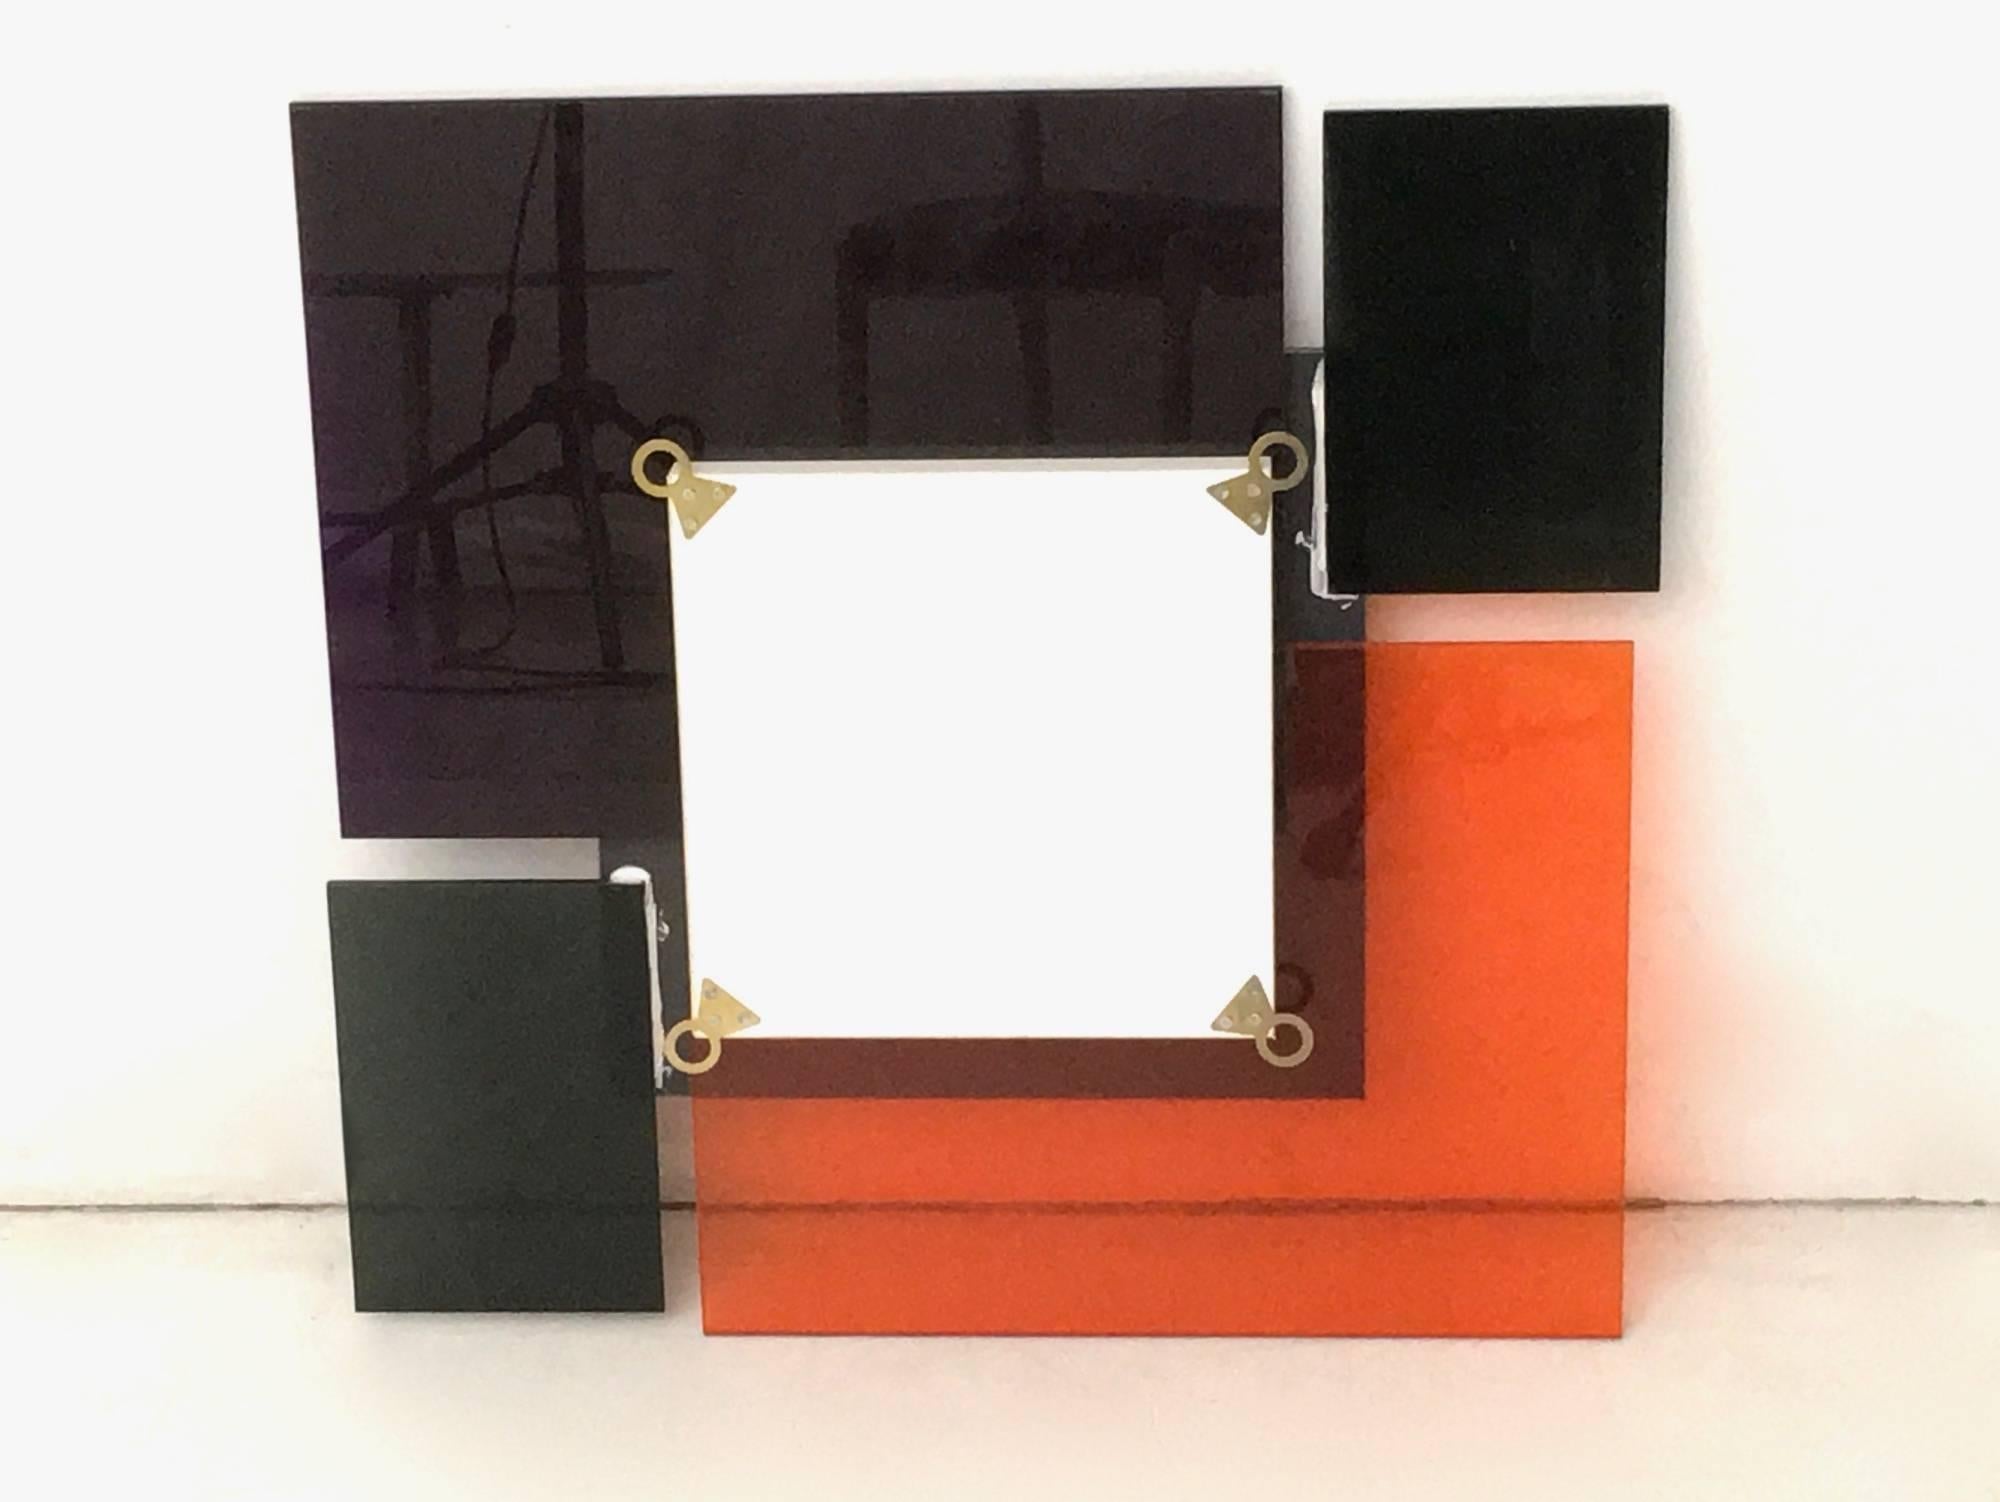 Pair of Postmodern Black and Orange Wall Mirrors in the Style of Sottsass, 1980s For Sale 7